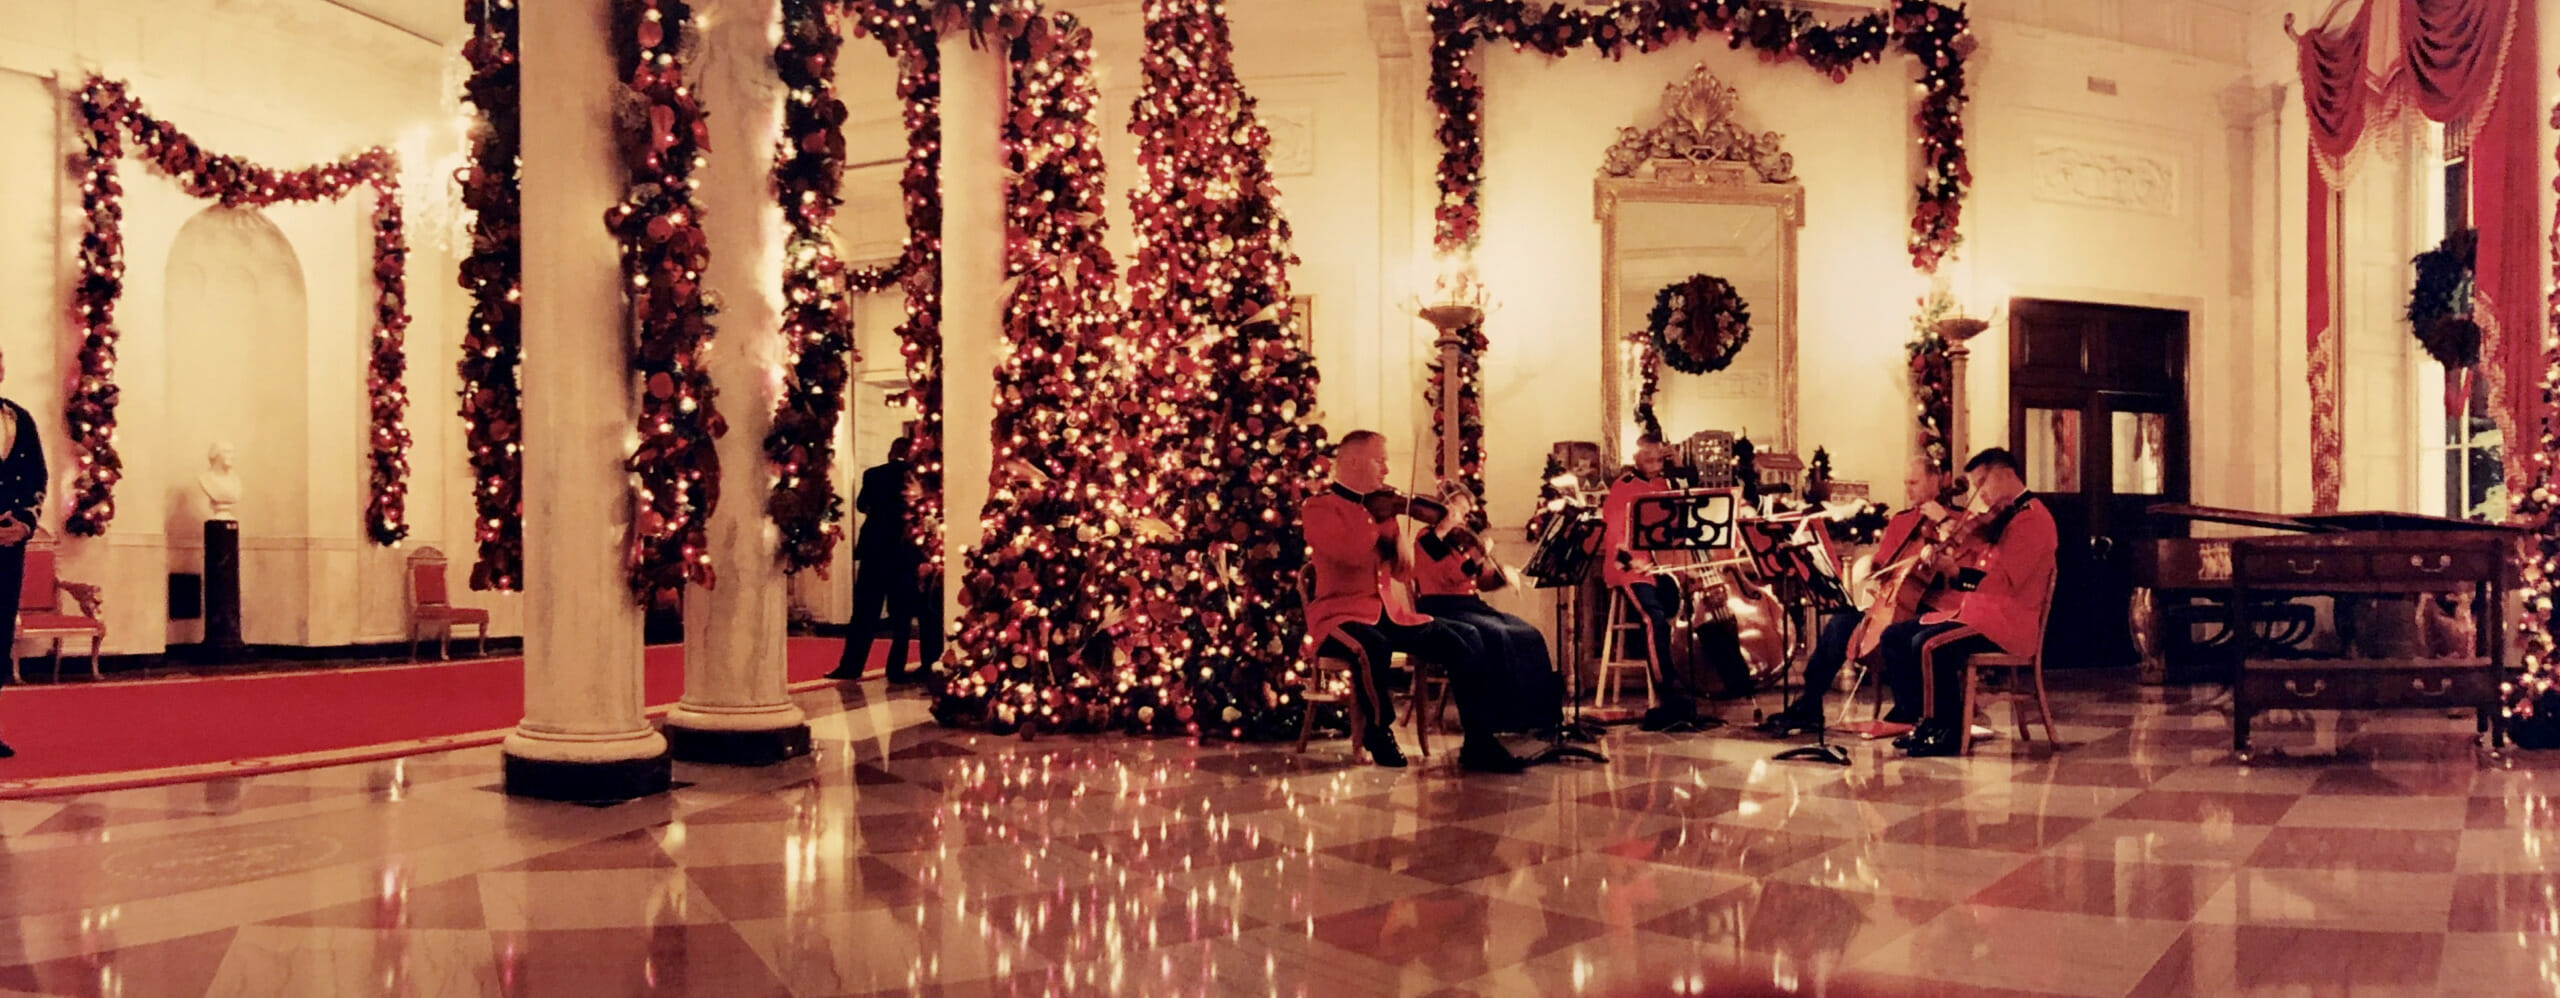 Peter Wilson performing in the Grand Foyer of the White House during Holiday Tours